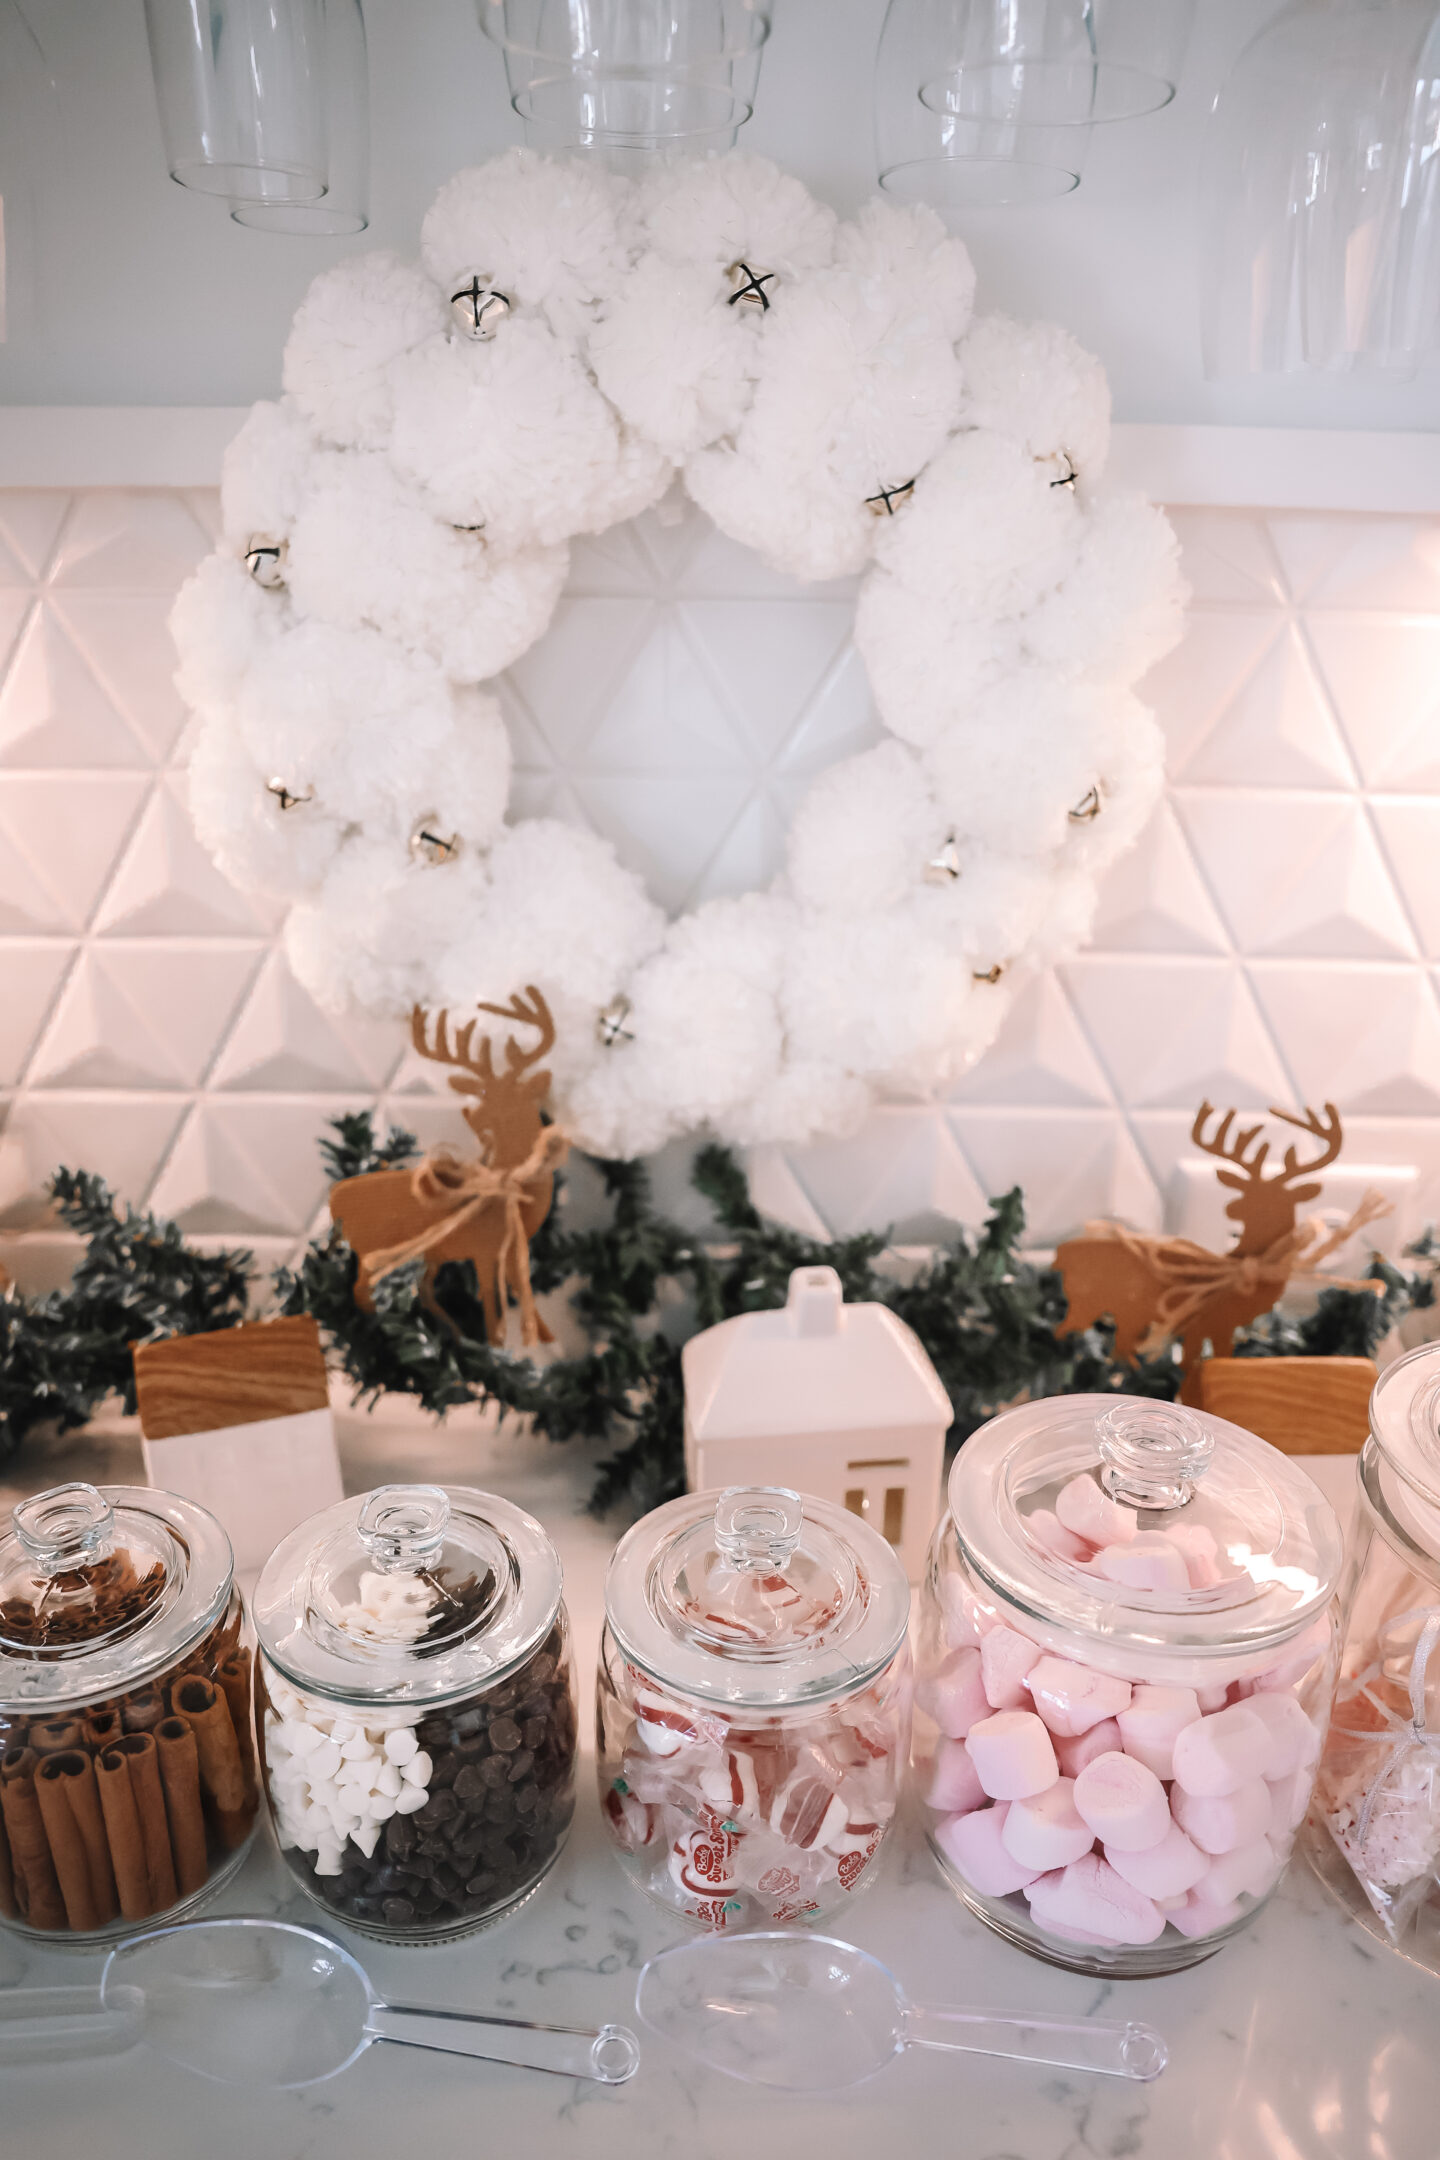 DIY hot cocoa bar for winter party